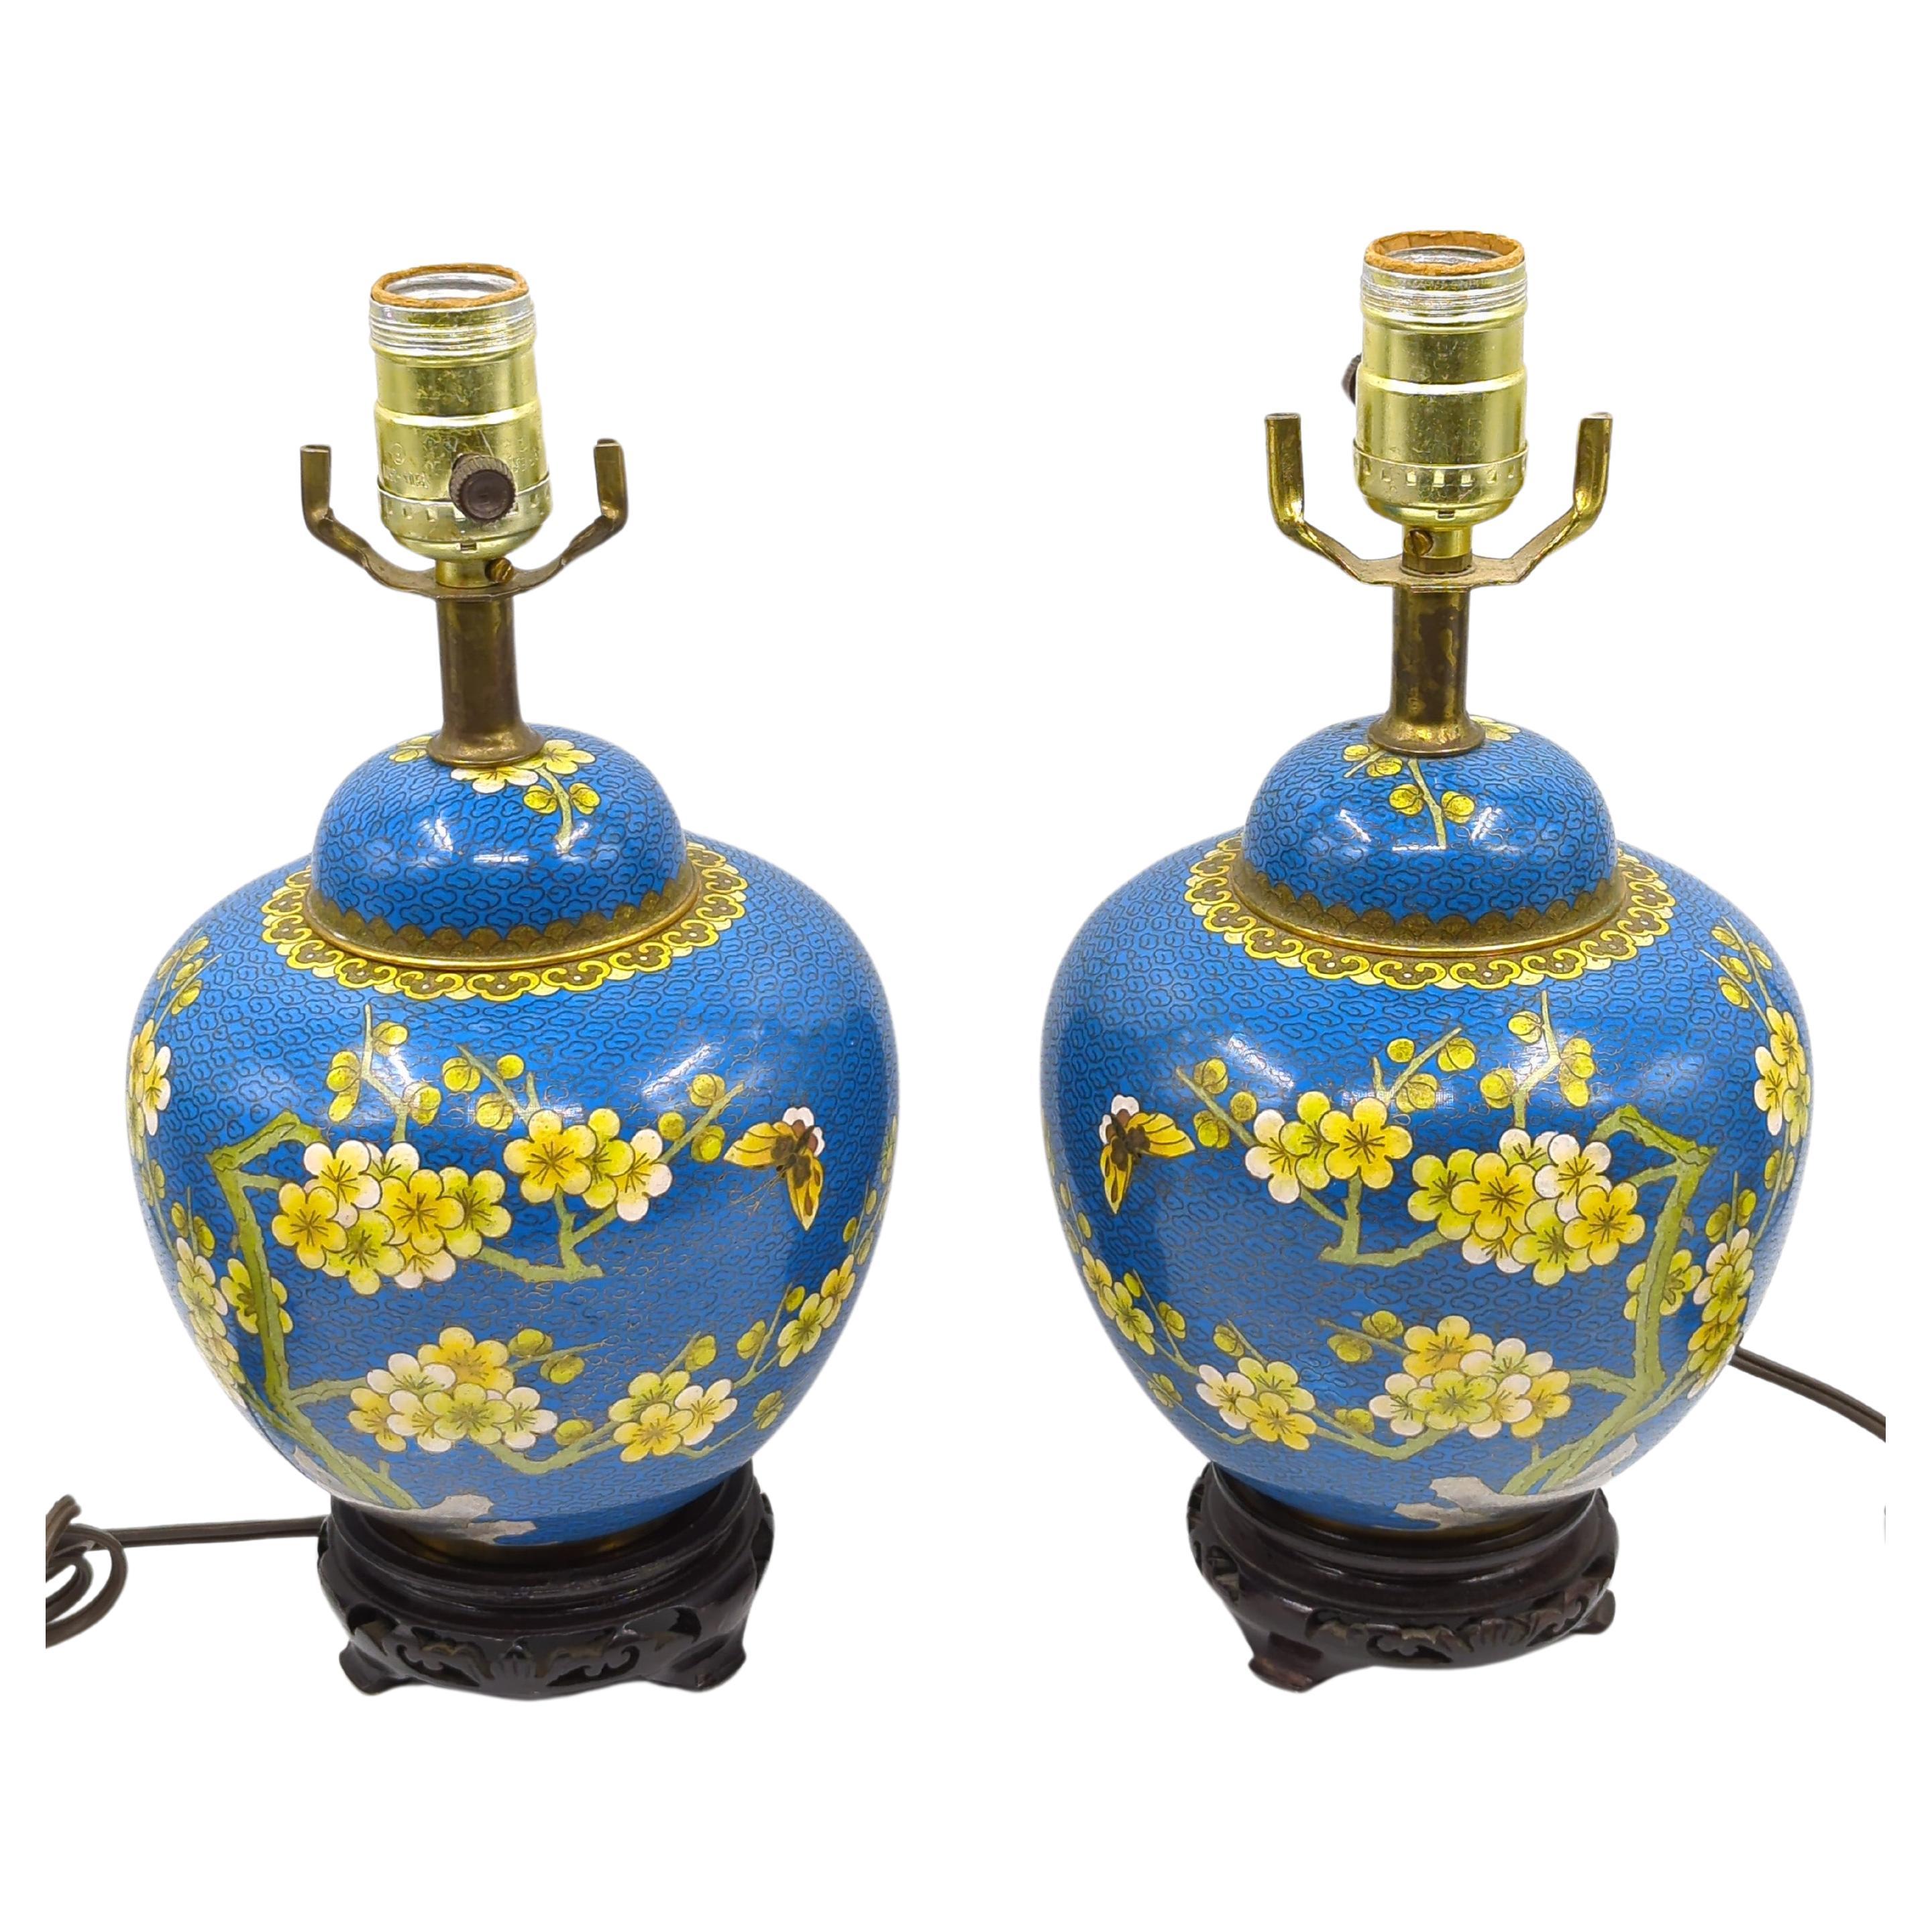 Pair Antique 19c Chinese Gilt Cloisonne Covered Prunus Ginger Jar Table Lamps For Sale 10